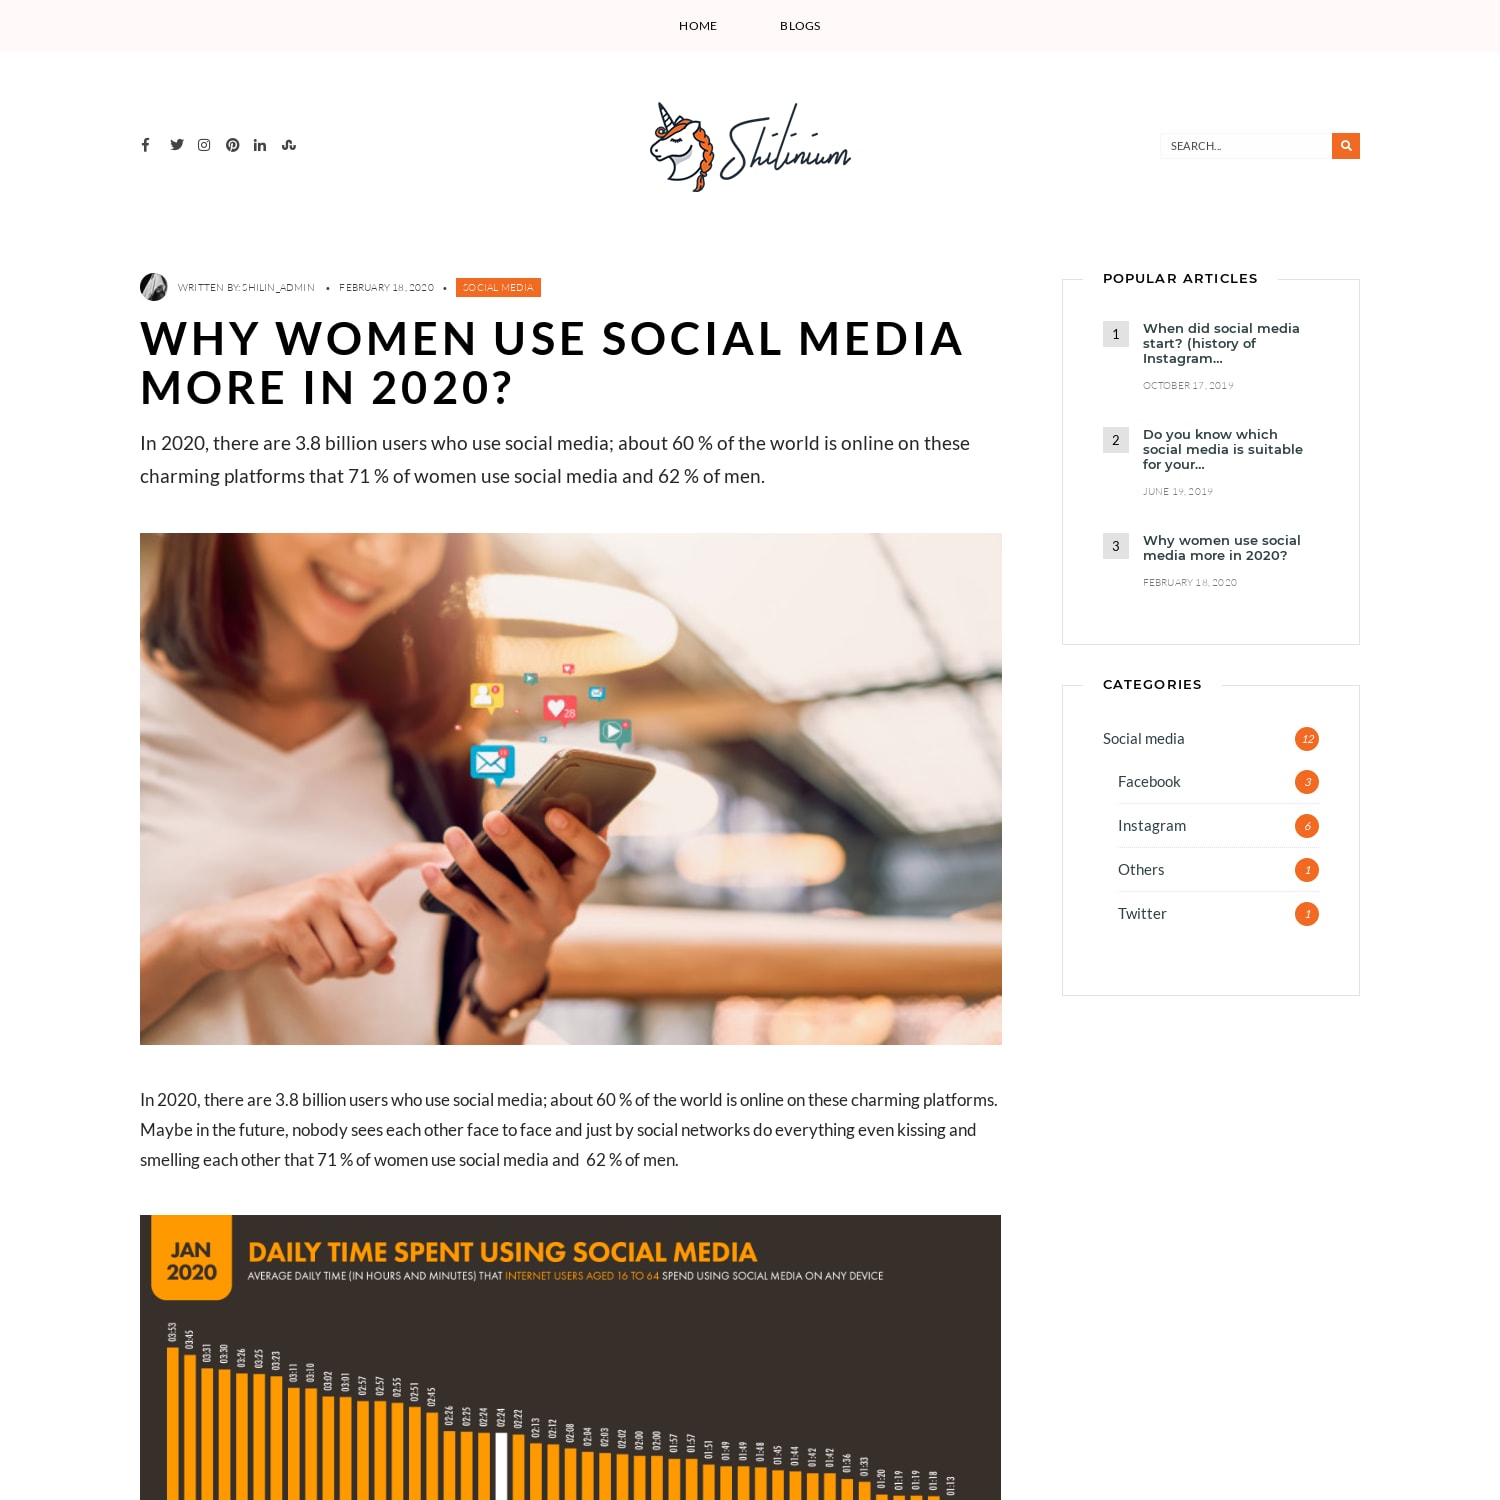 Why women use social media more in 2020?